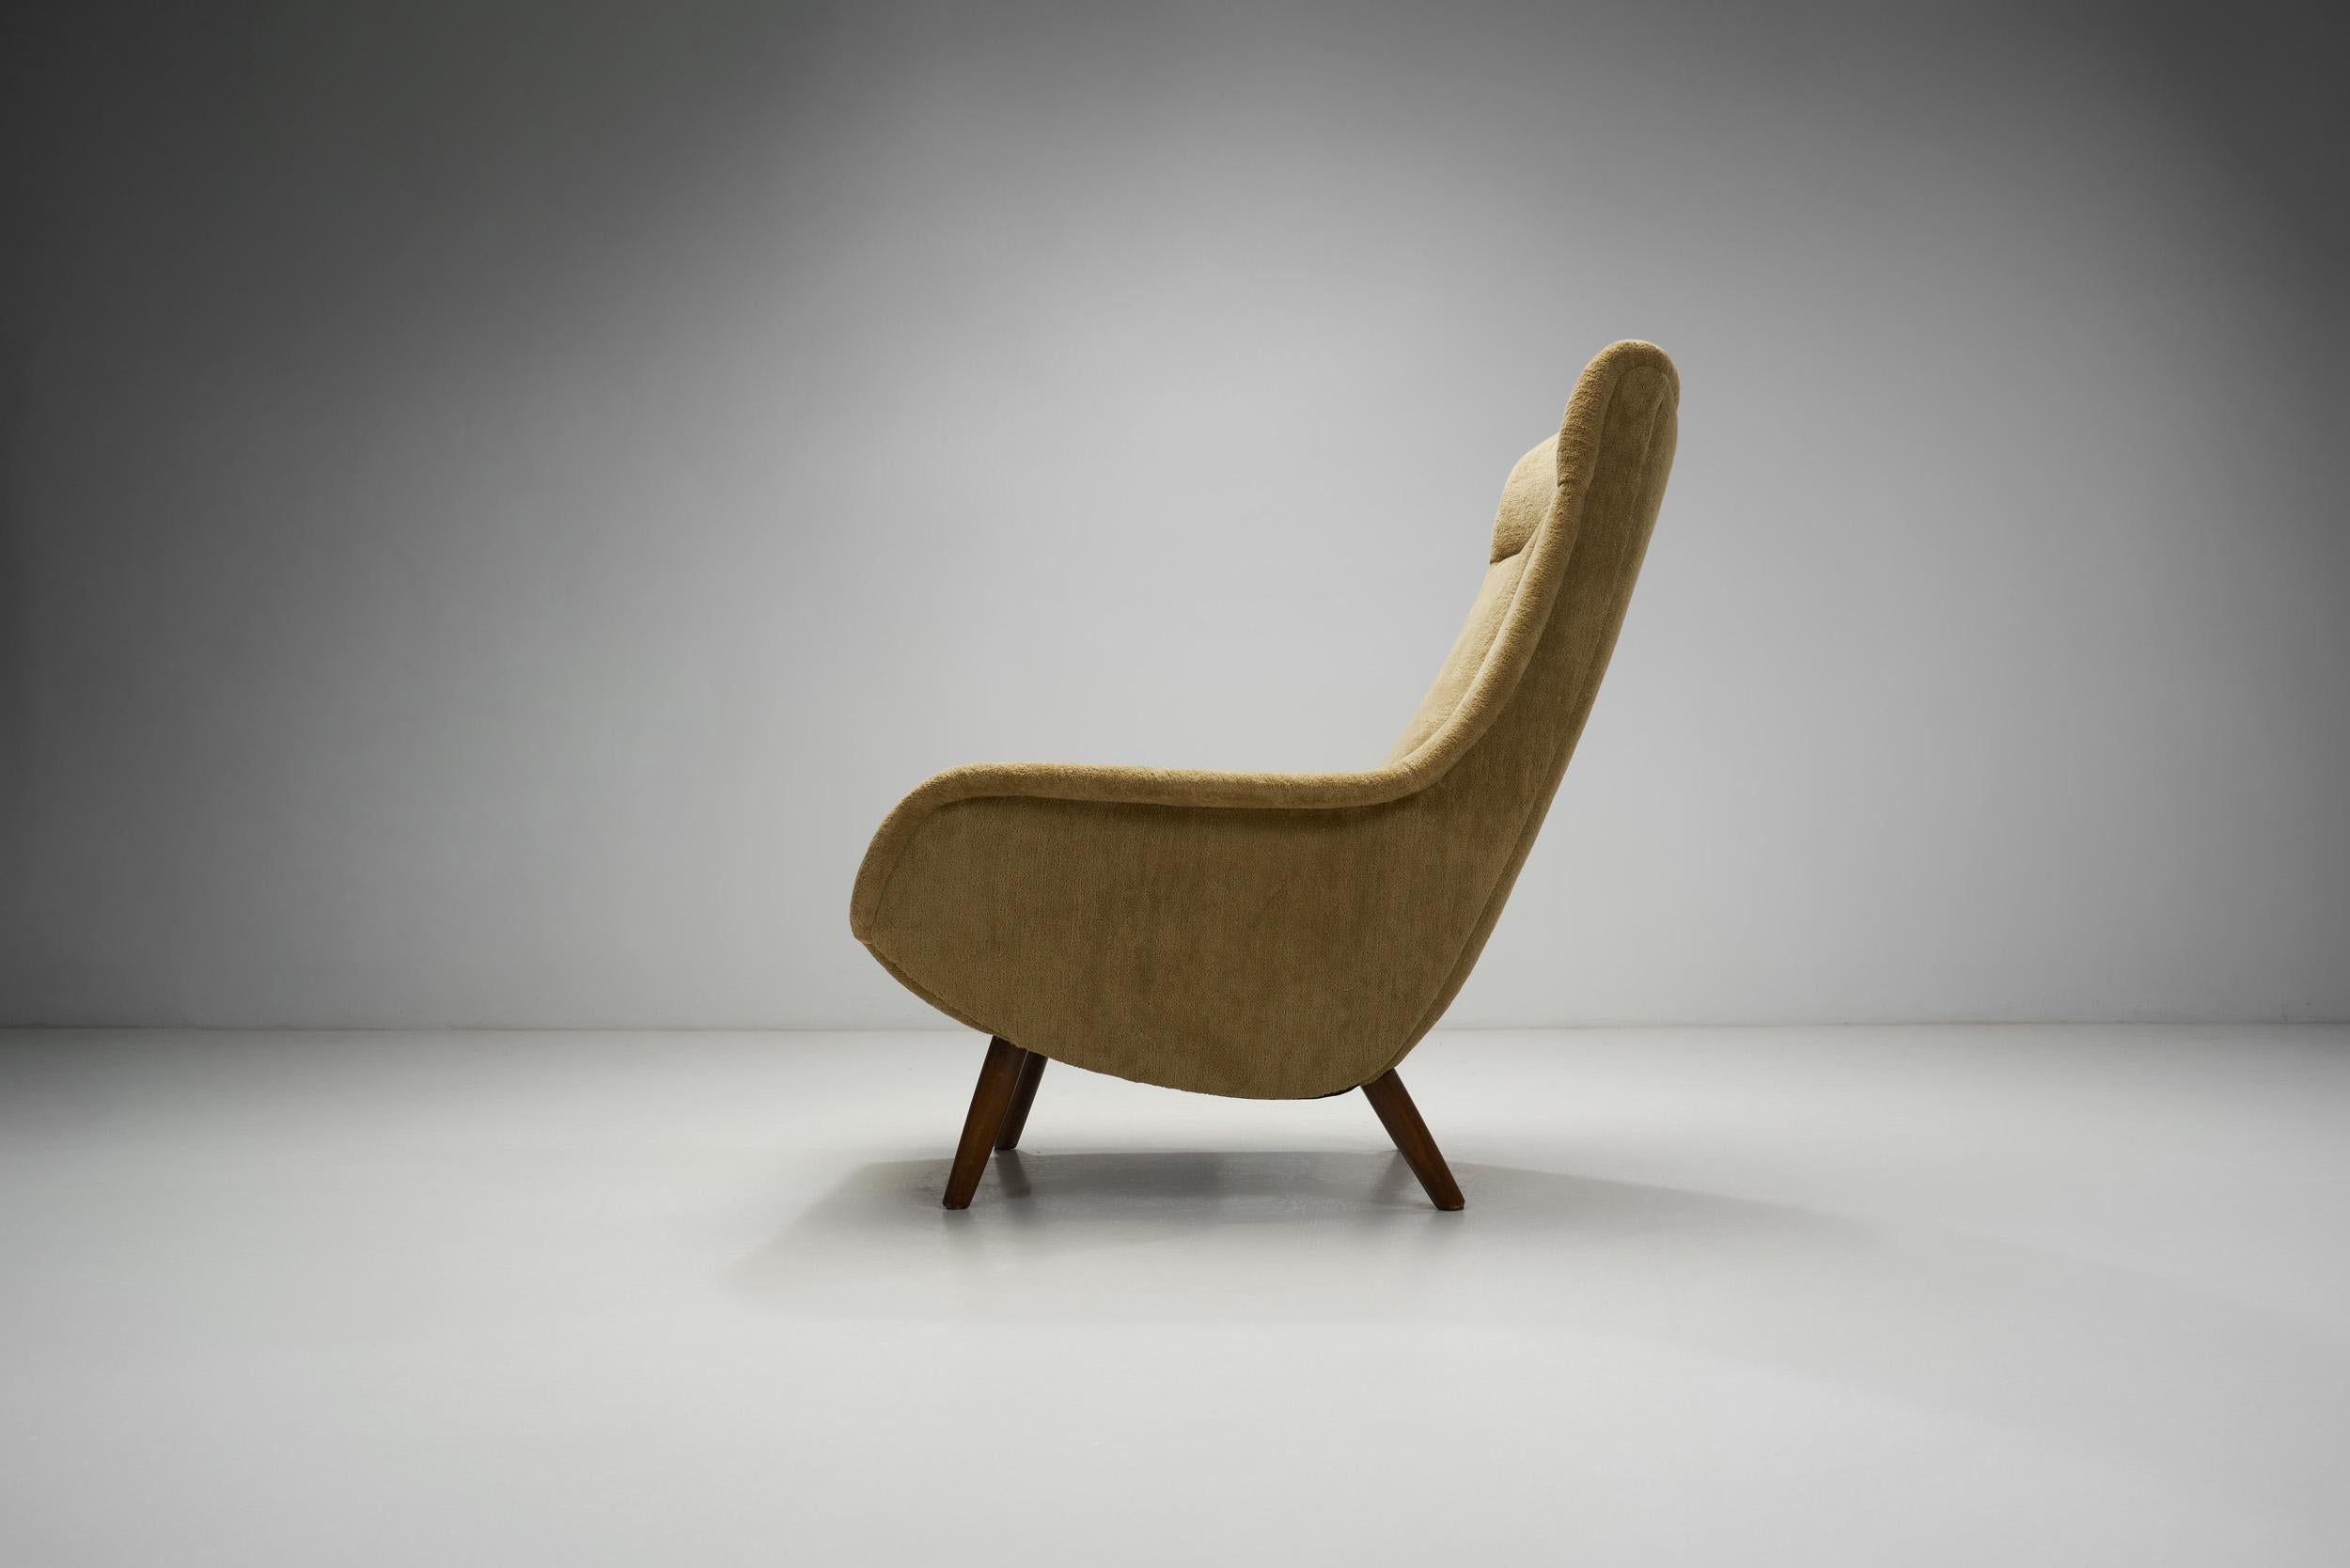 European Mid-Century Modern Lounge Chair with Beech Wood Legs, Europe 1960s For Sale 9